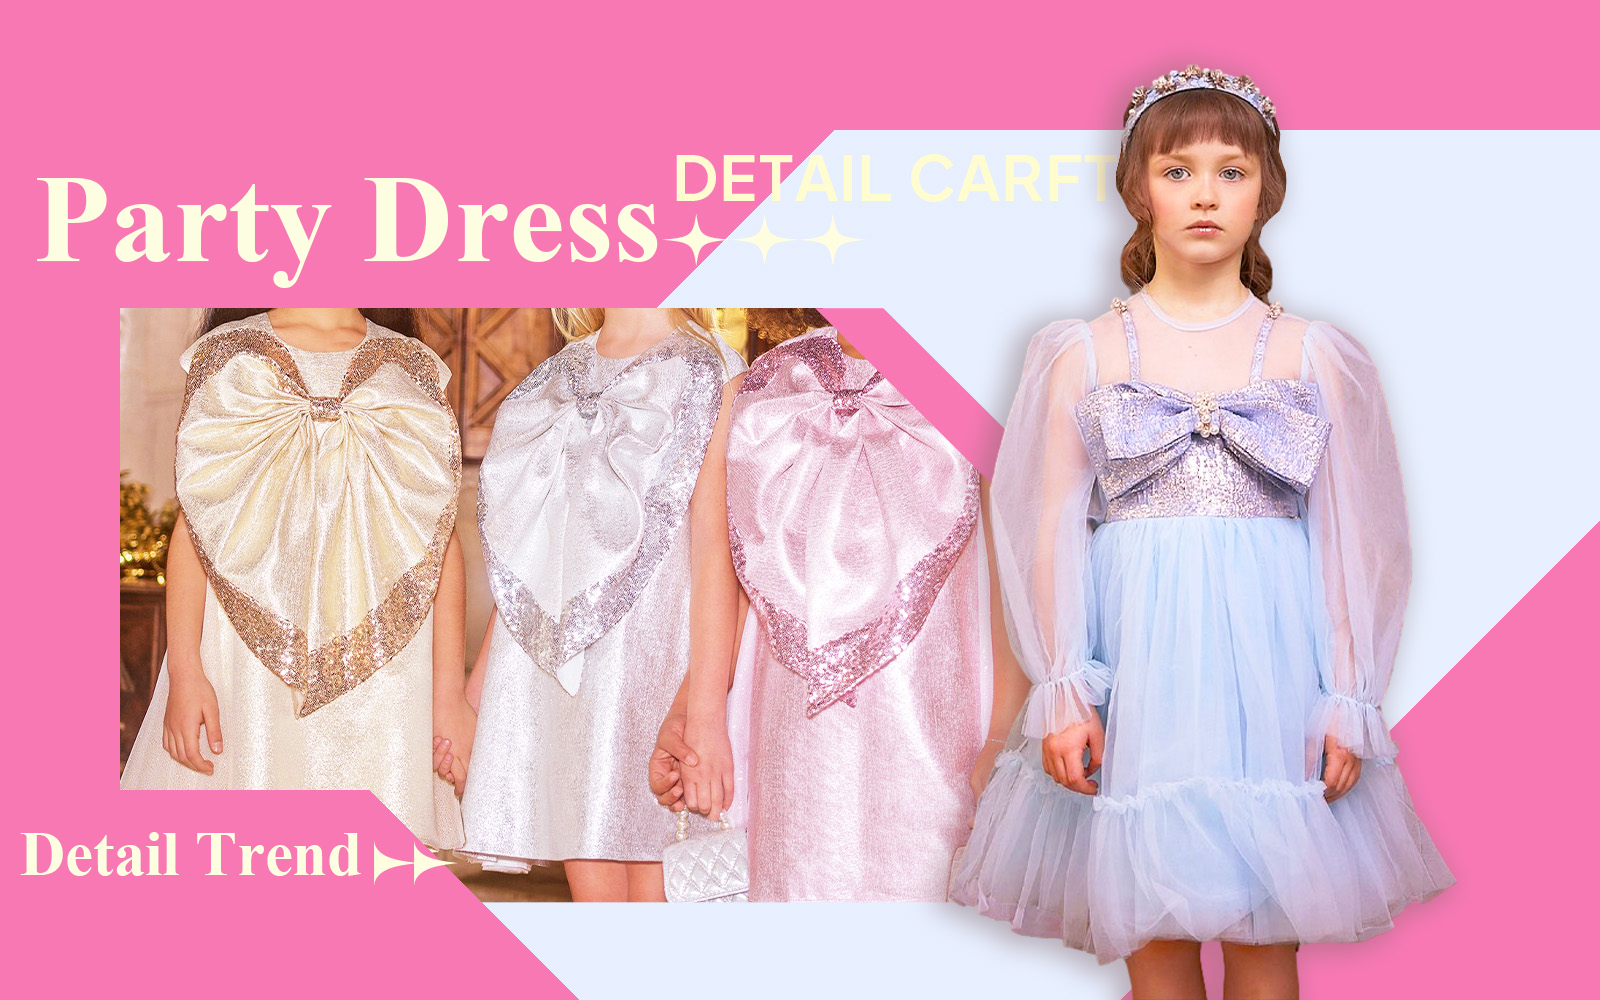 Party Dress -- The Detail & Craft Trend for Kidswear